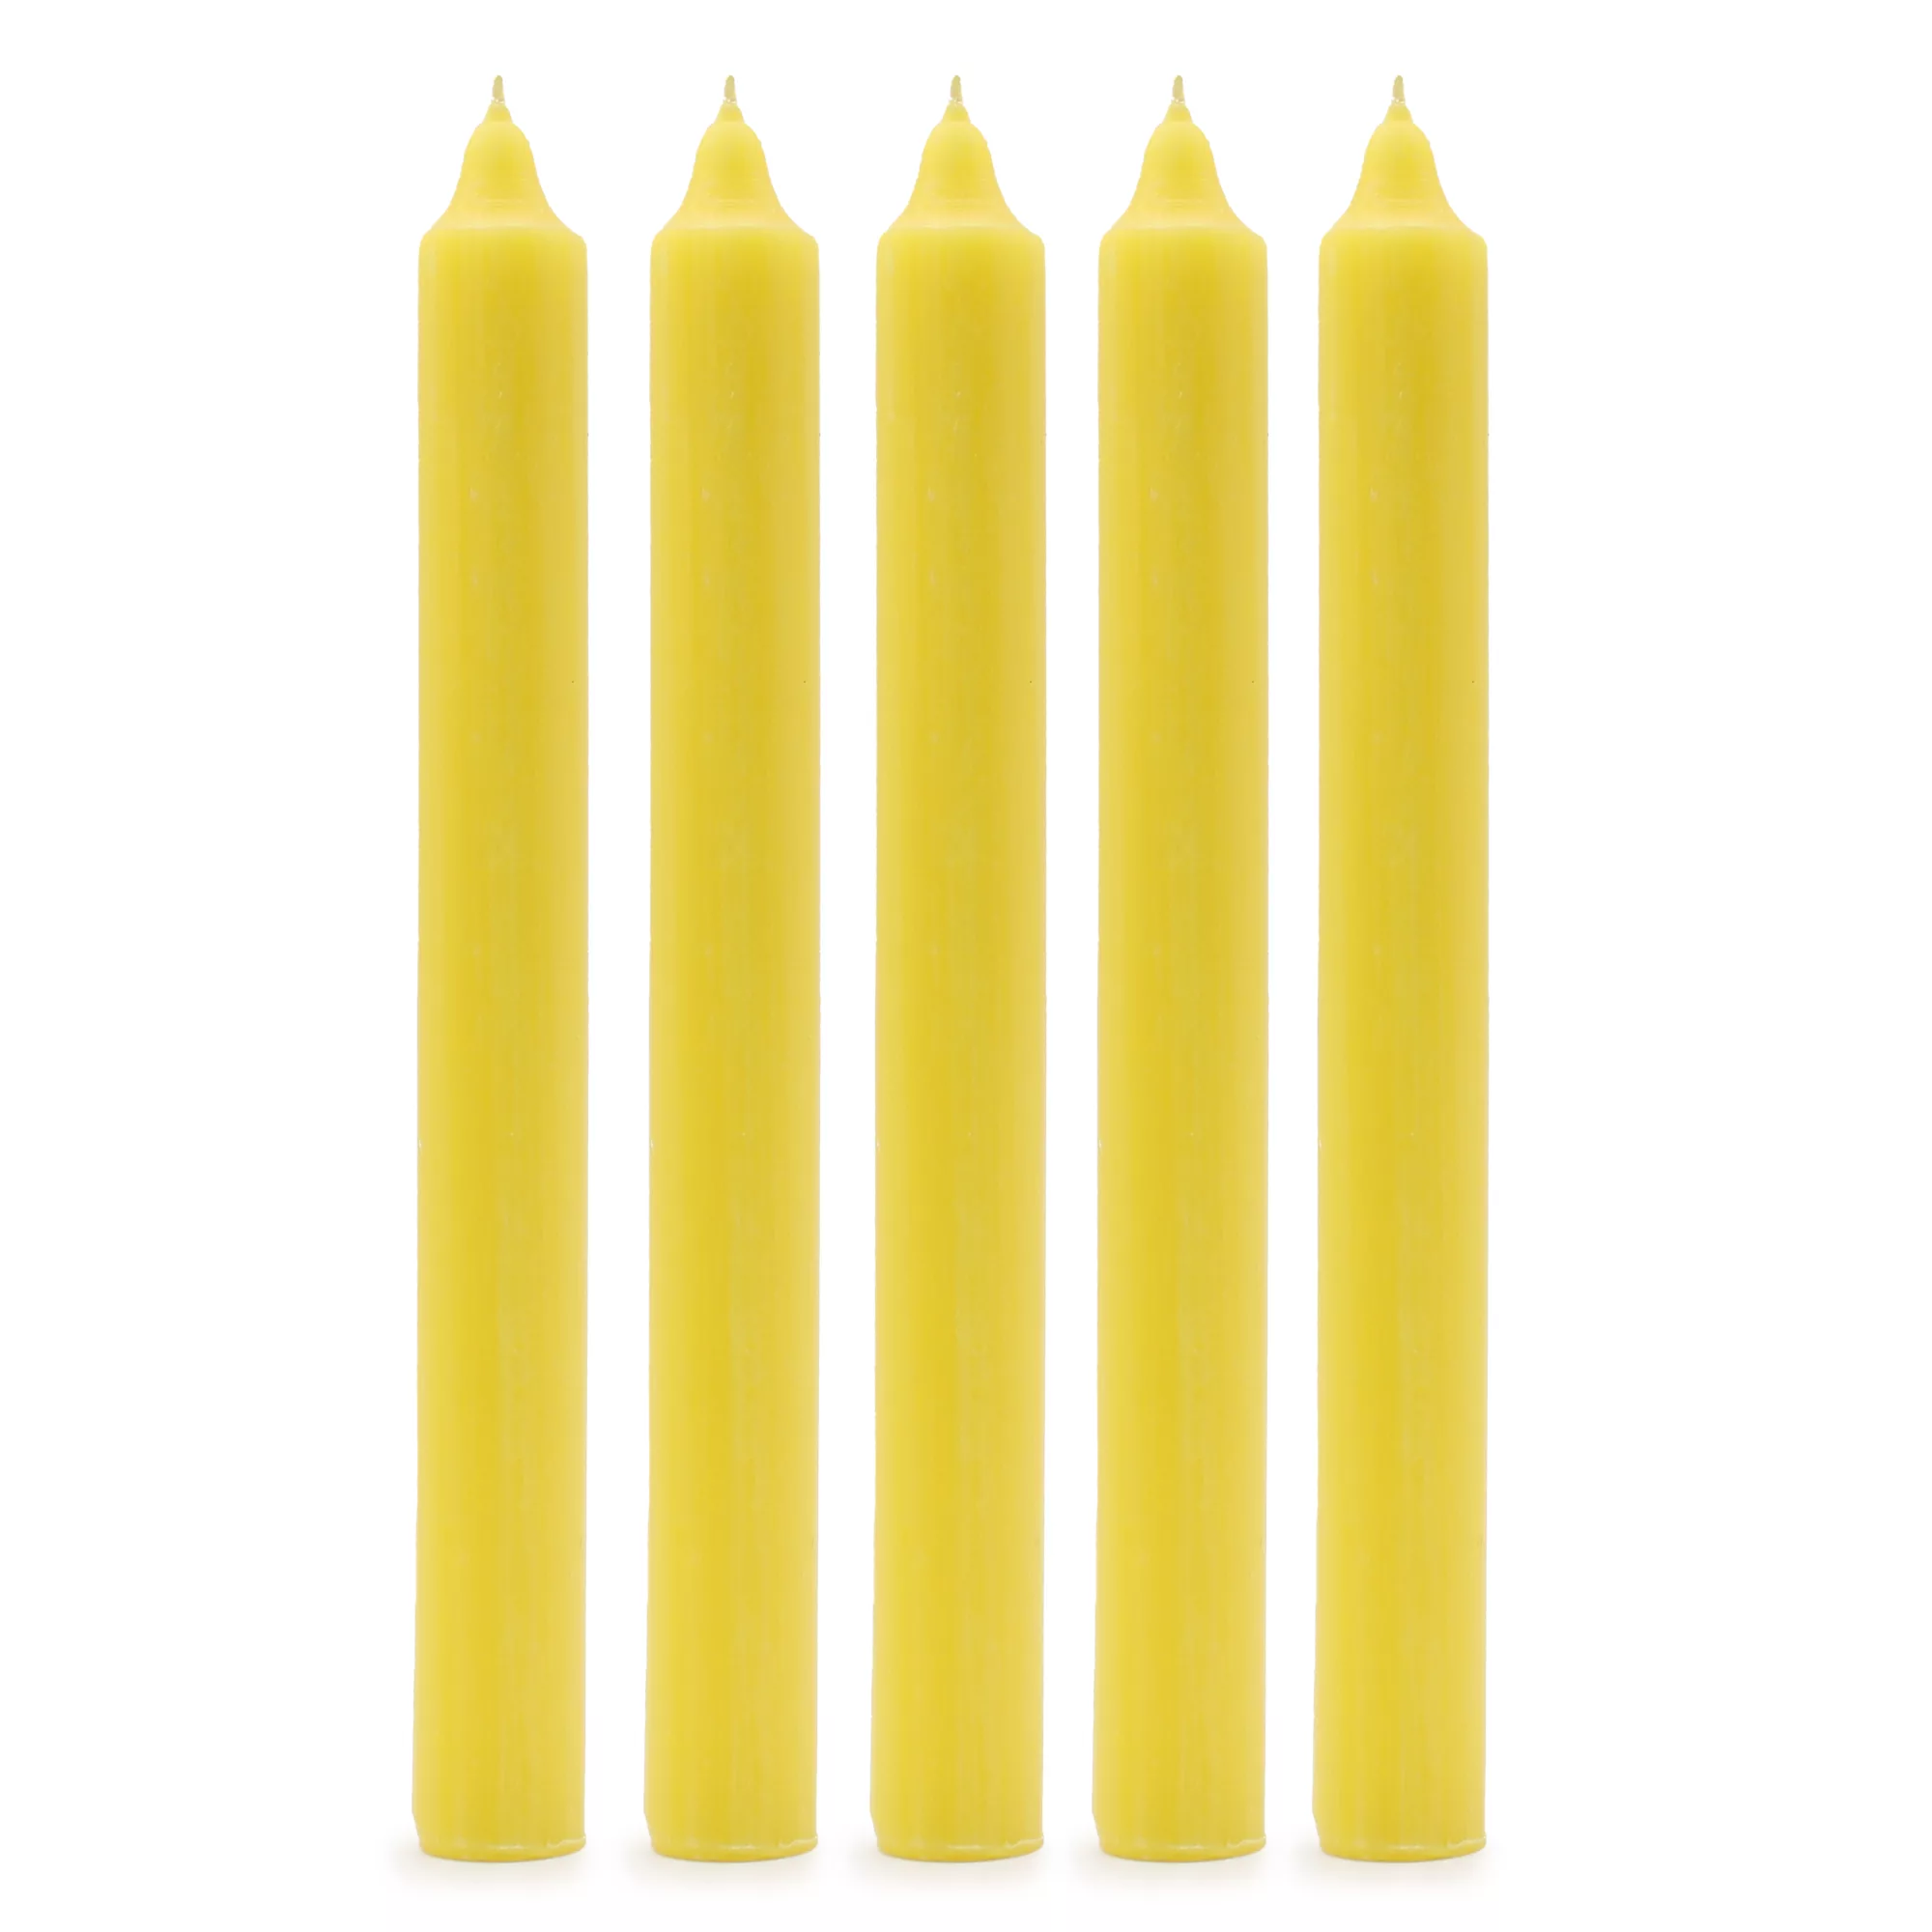 Solid Colour Dinner Candles – Rustic Lemon – Pack of 5